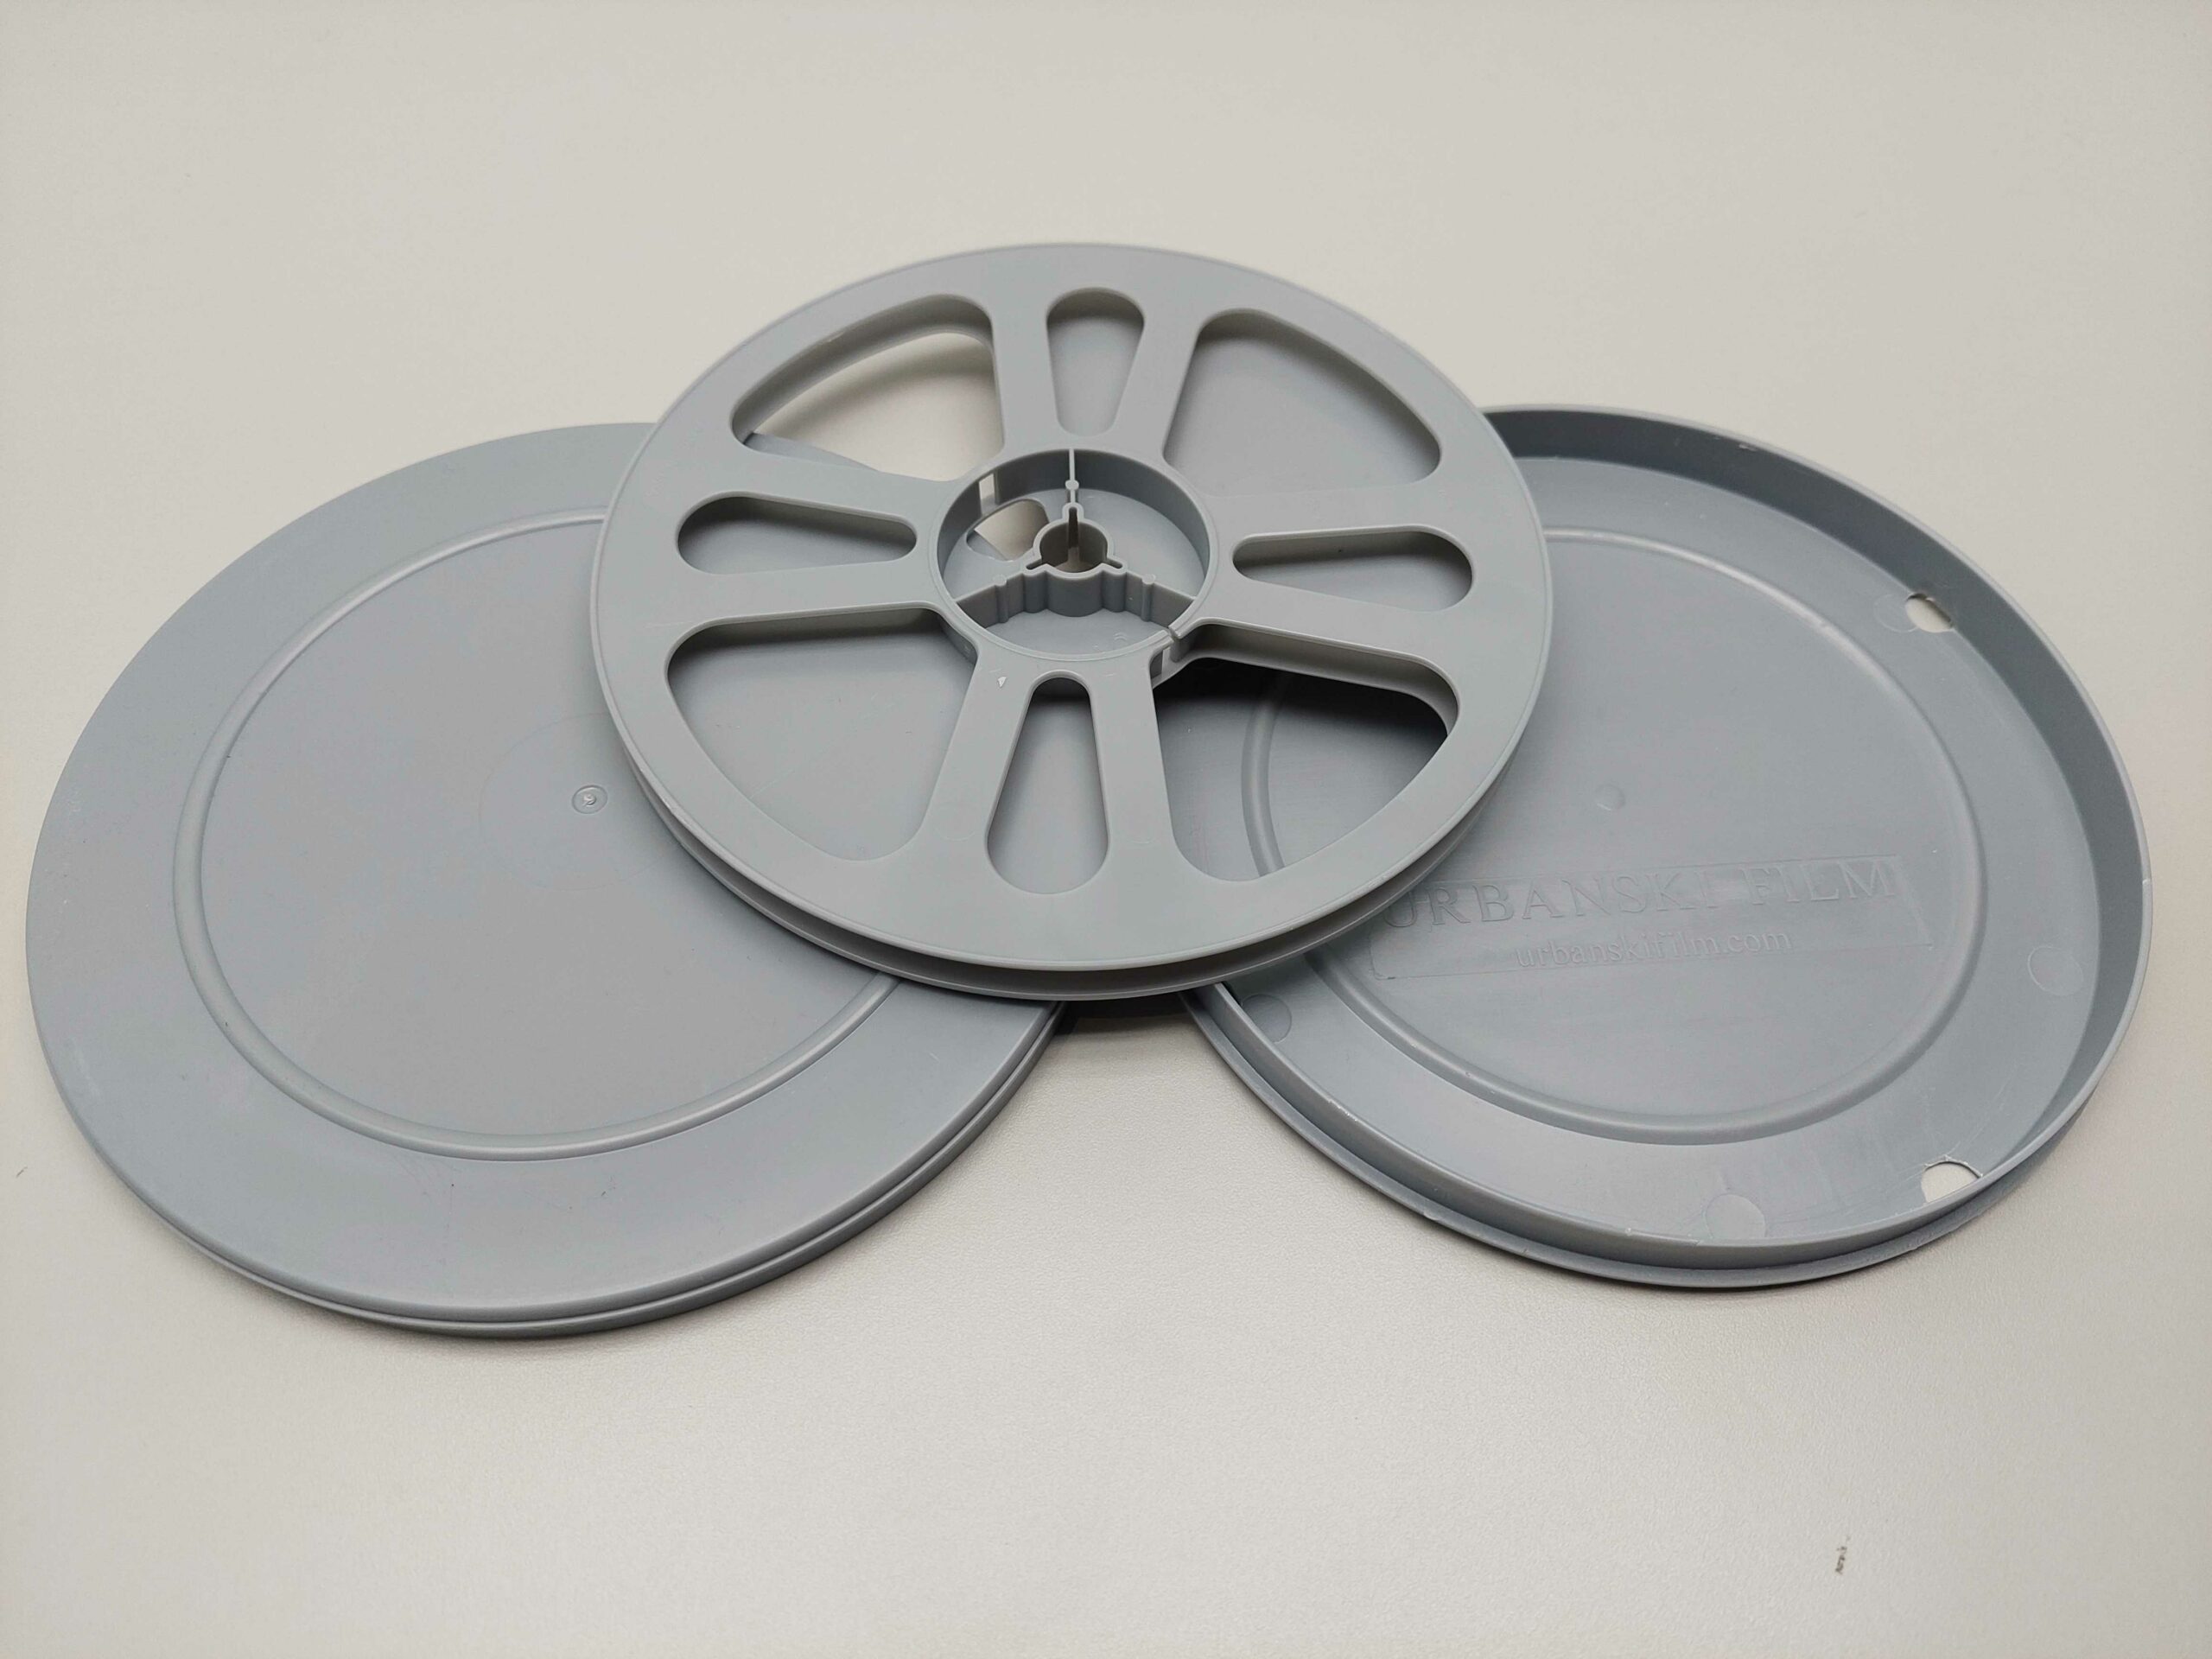 Super 8mm 50ft Plastic Reel – Liaison of Independent Filmmakers of